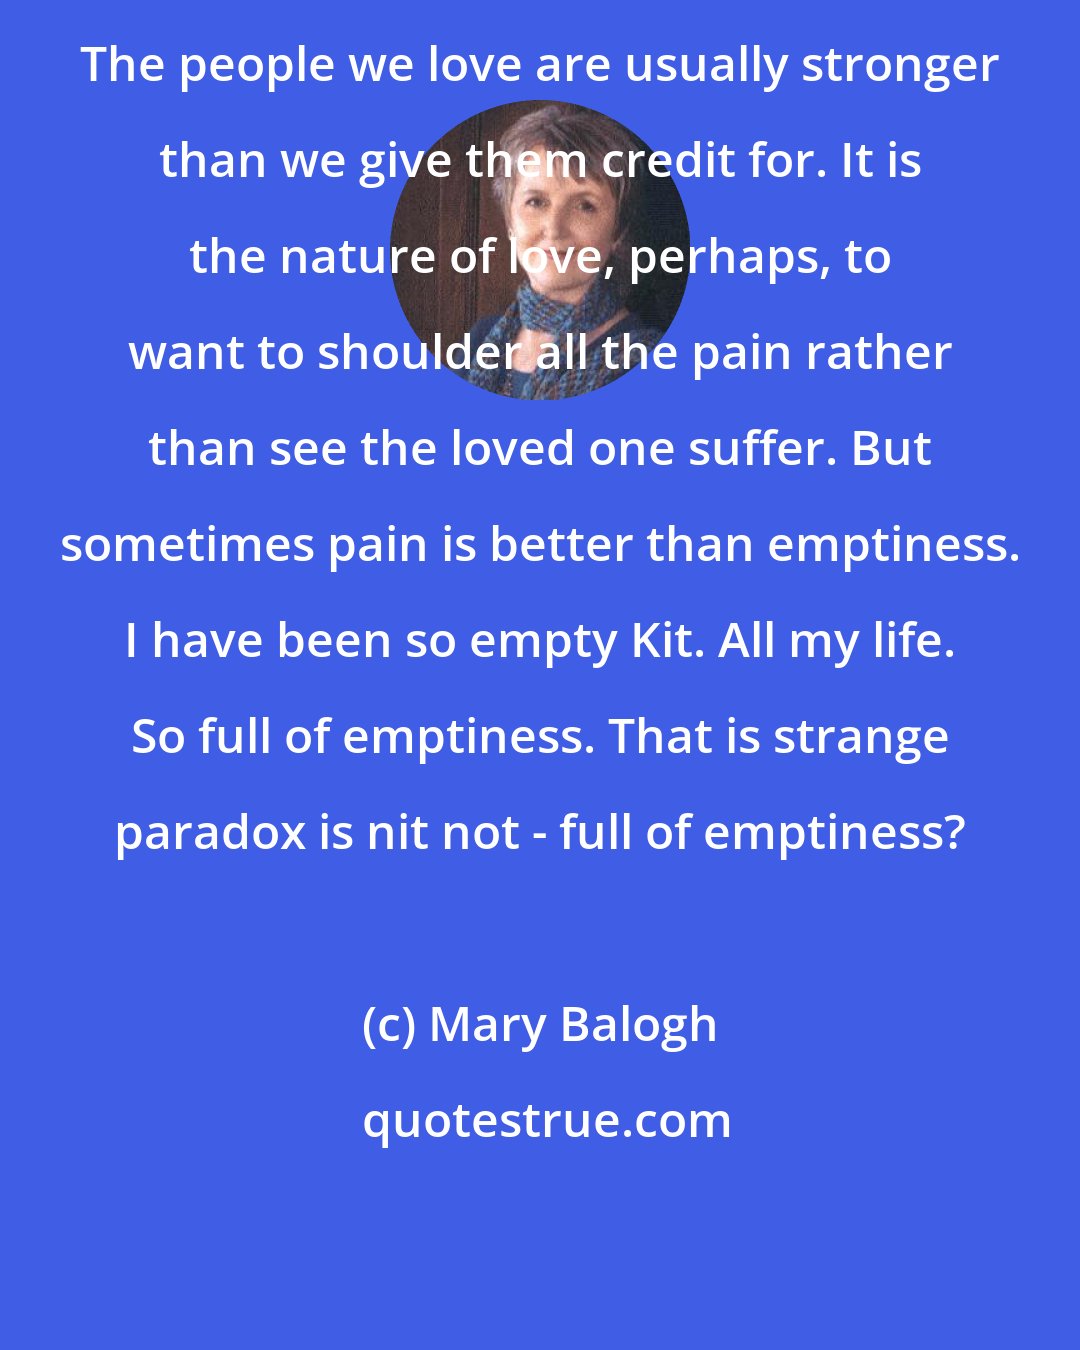 Mary Balogh: The people we love are usually stronger than we give them credit for. It is the nature of love, perhaps, to want to shoulder all the pain rather than see the loved one suffer. But sometimes pain is better than emptiness. I have been so empty Kit. All my life. So full of emptiness. That is strange paradox is nit not - full of emptiness?